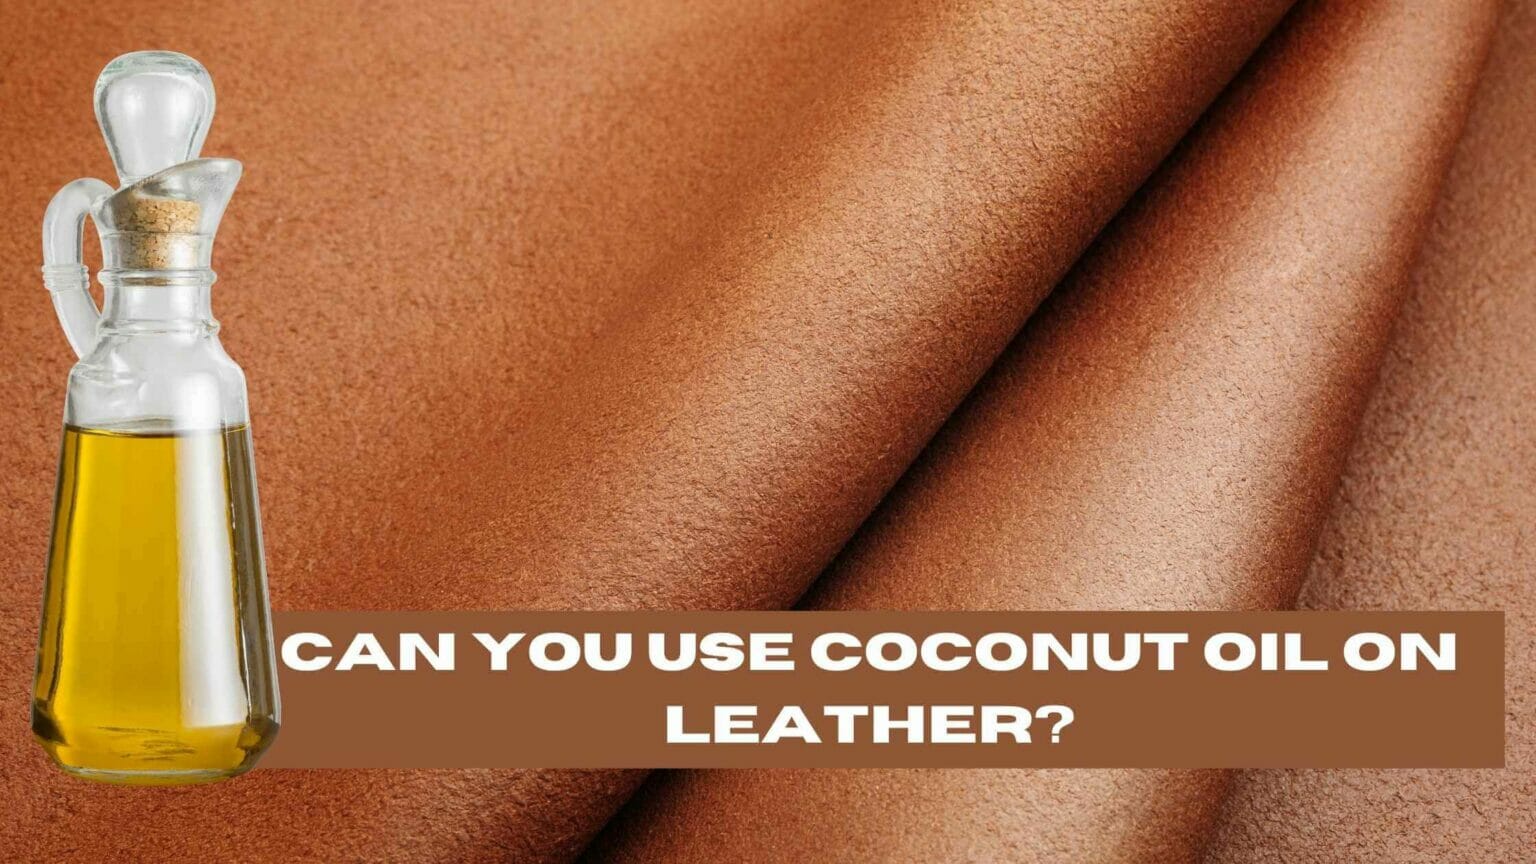 can you use coconut oil on leather sofa